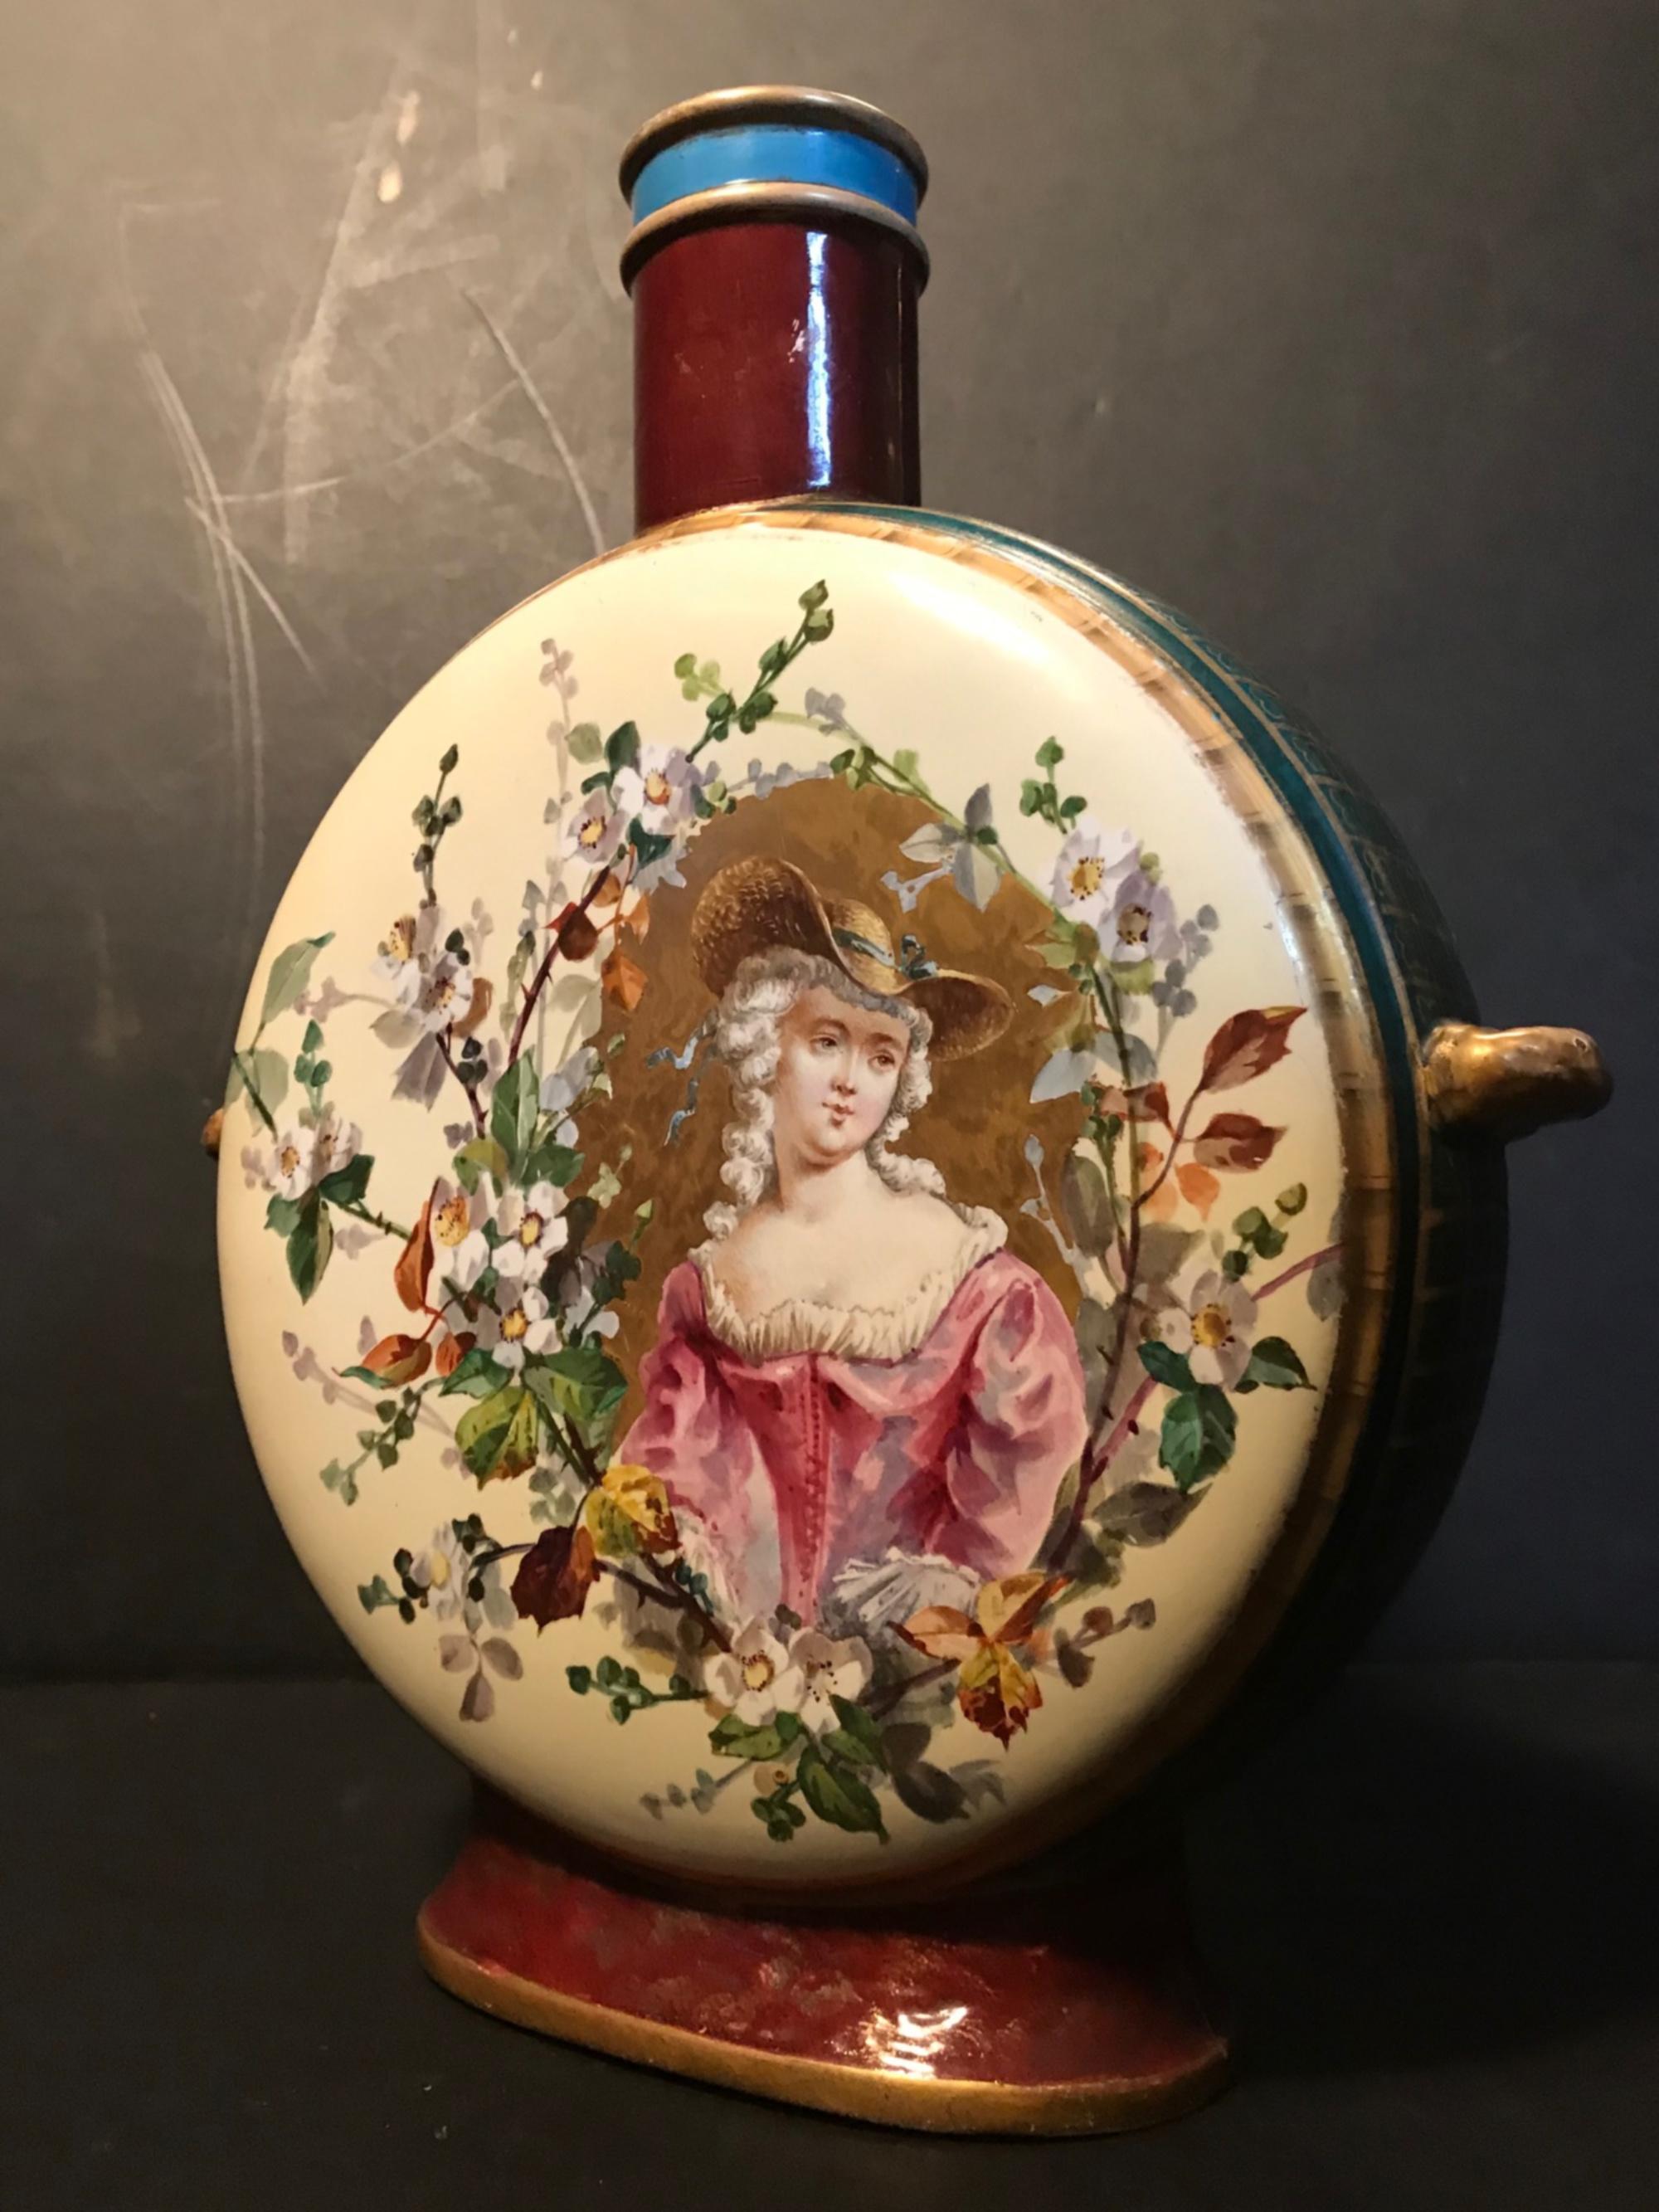 Antique 19th century Royal Vienna Belle époque Porcelain moon flask.

This extraordinary Royal Vienna porcelain moon flask is magnificent decorated with a very fine portrait painting of a classical Belle époque girl. The finely rendered hand